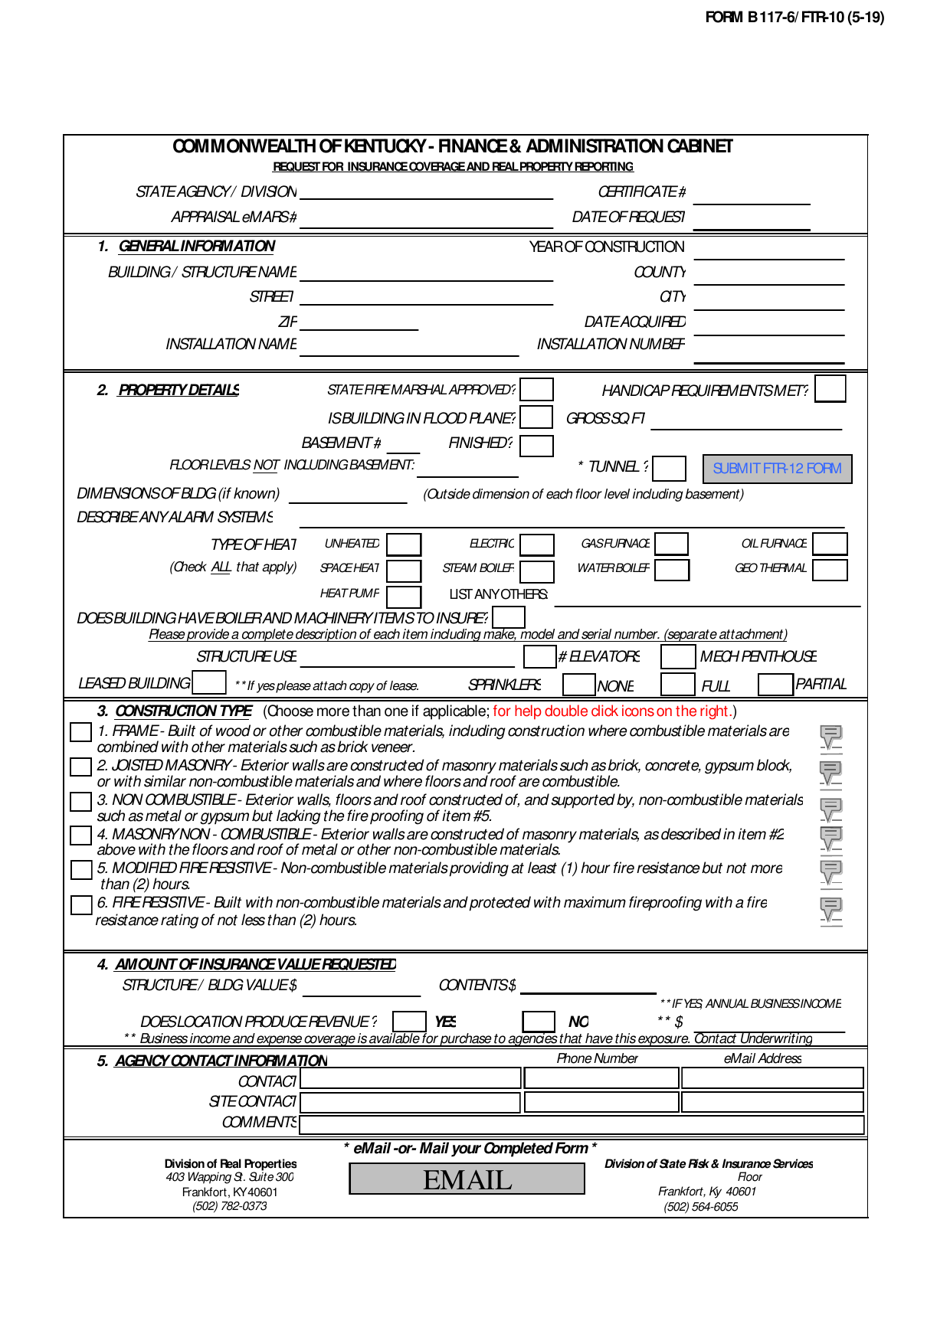 Form B117-6 (FTR-10) Request for Insurance Coverage and Real Property Reporting - Kentucky, Page 1